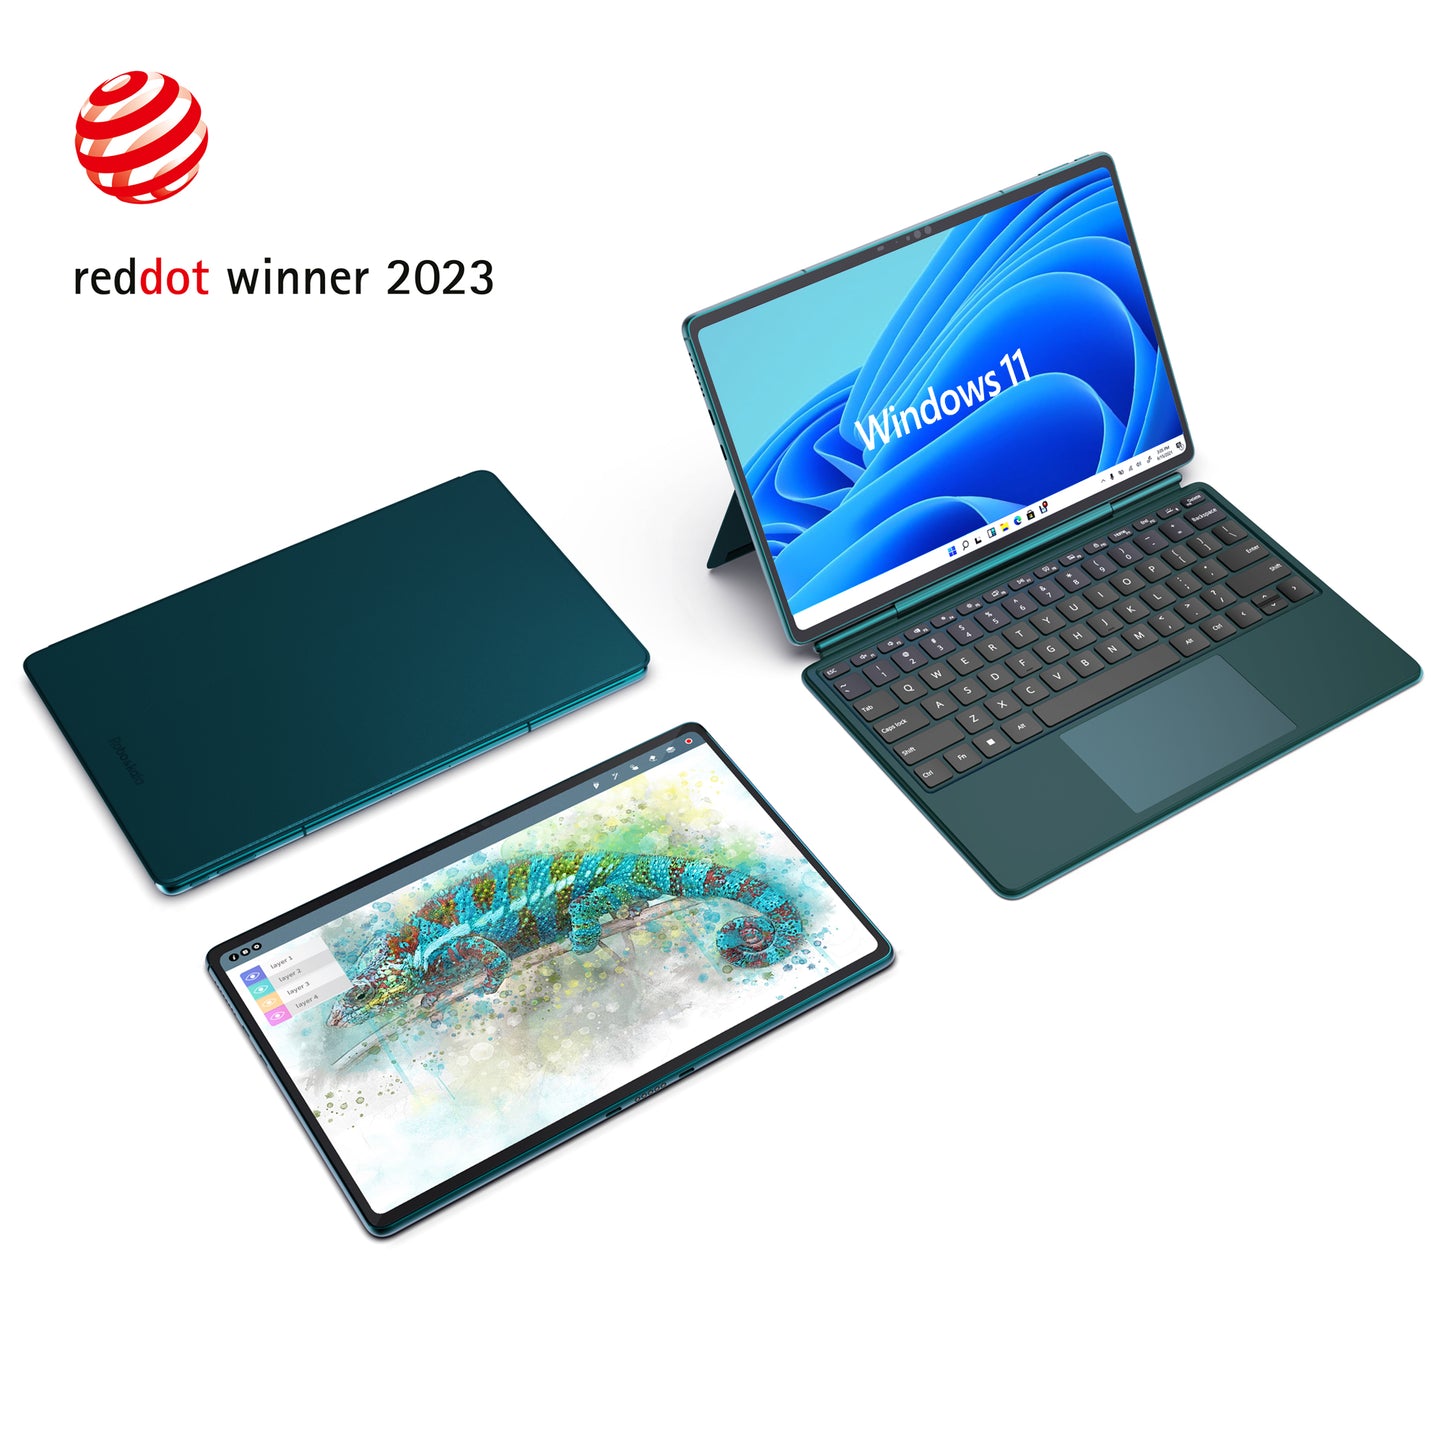 Robo & Kala 2-in-1 laptop（Available only in non-US ）